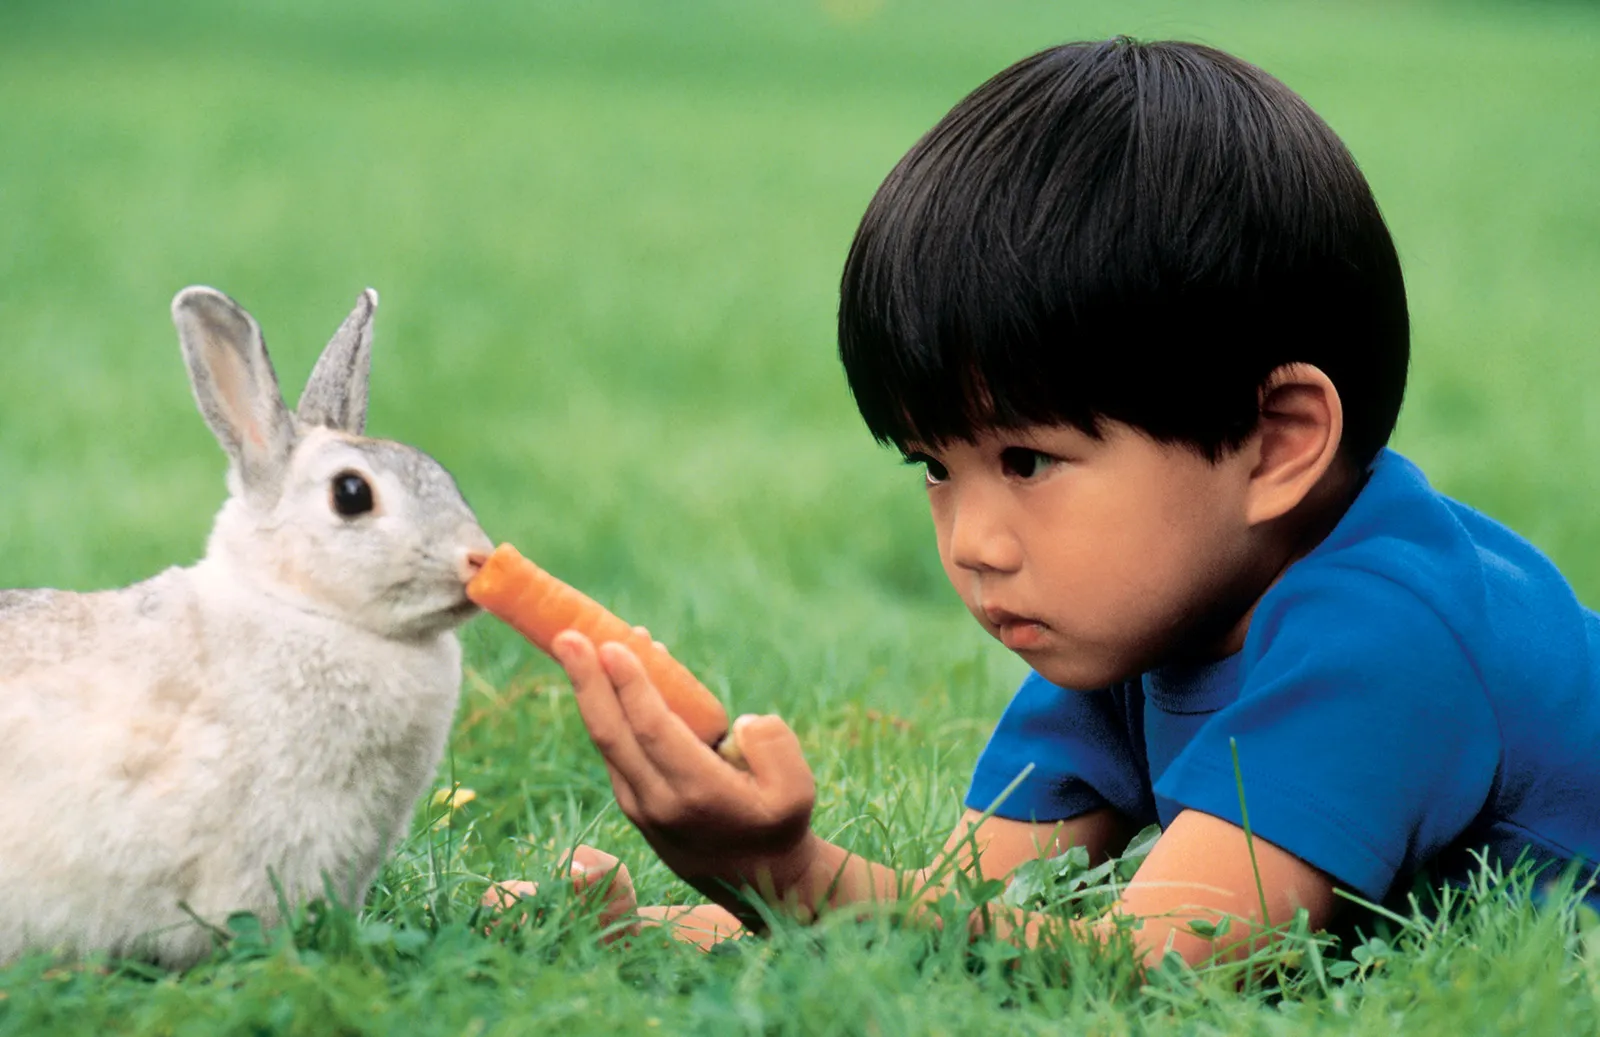 Kids Can Play with Rabbits